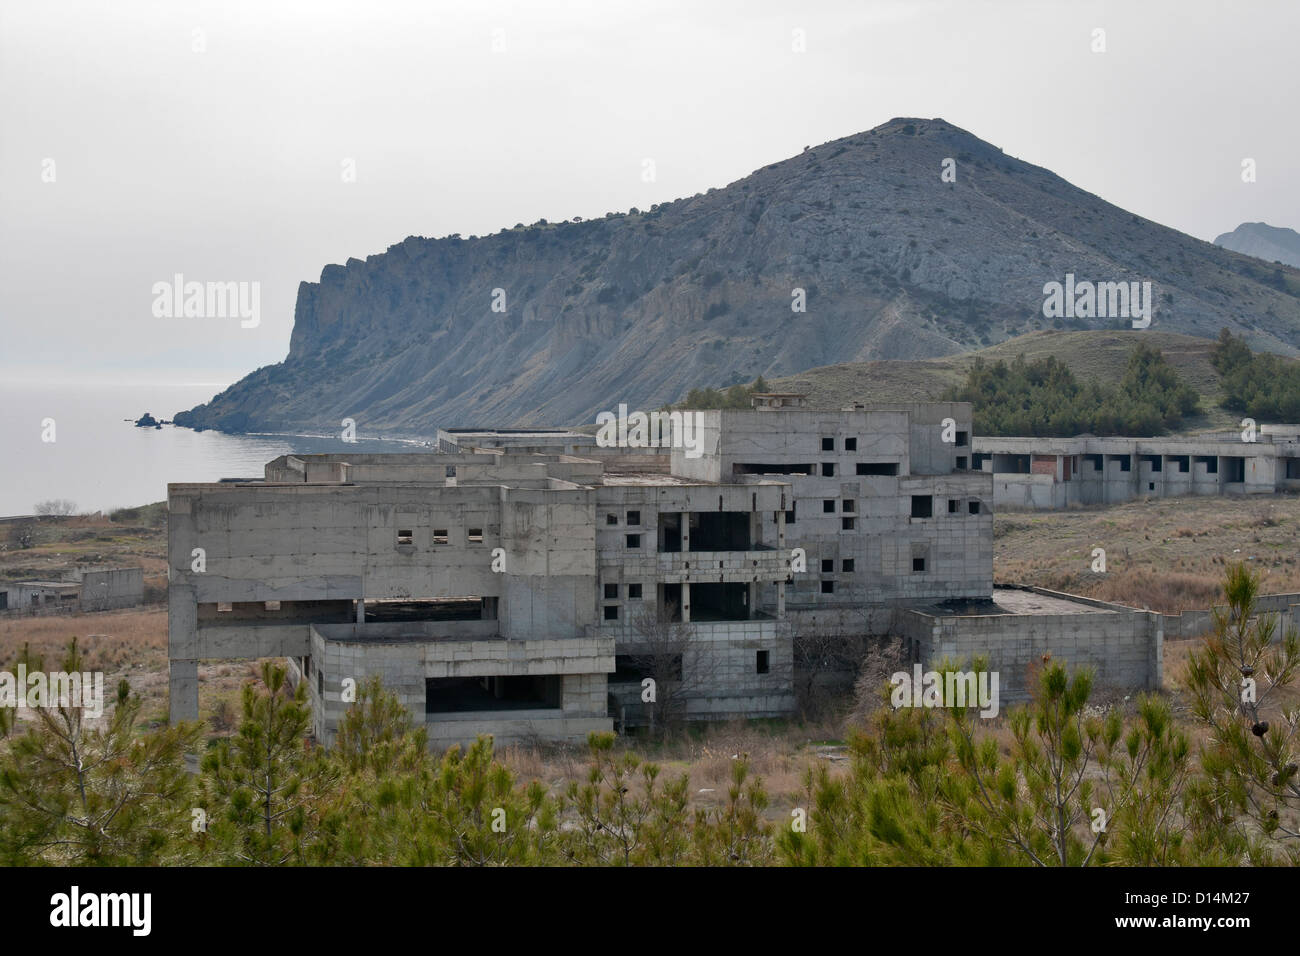 Group of old abandoned concrete military buildings close to the sea beach and mountain Stock Photo